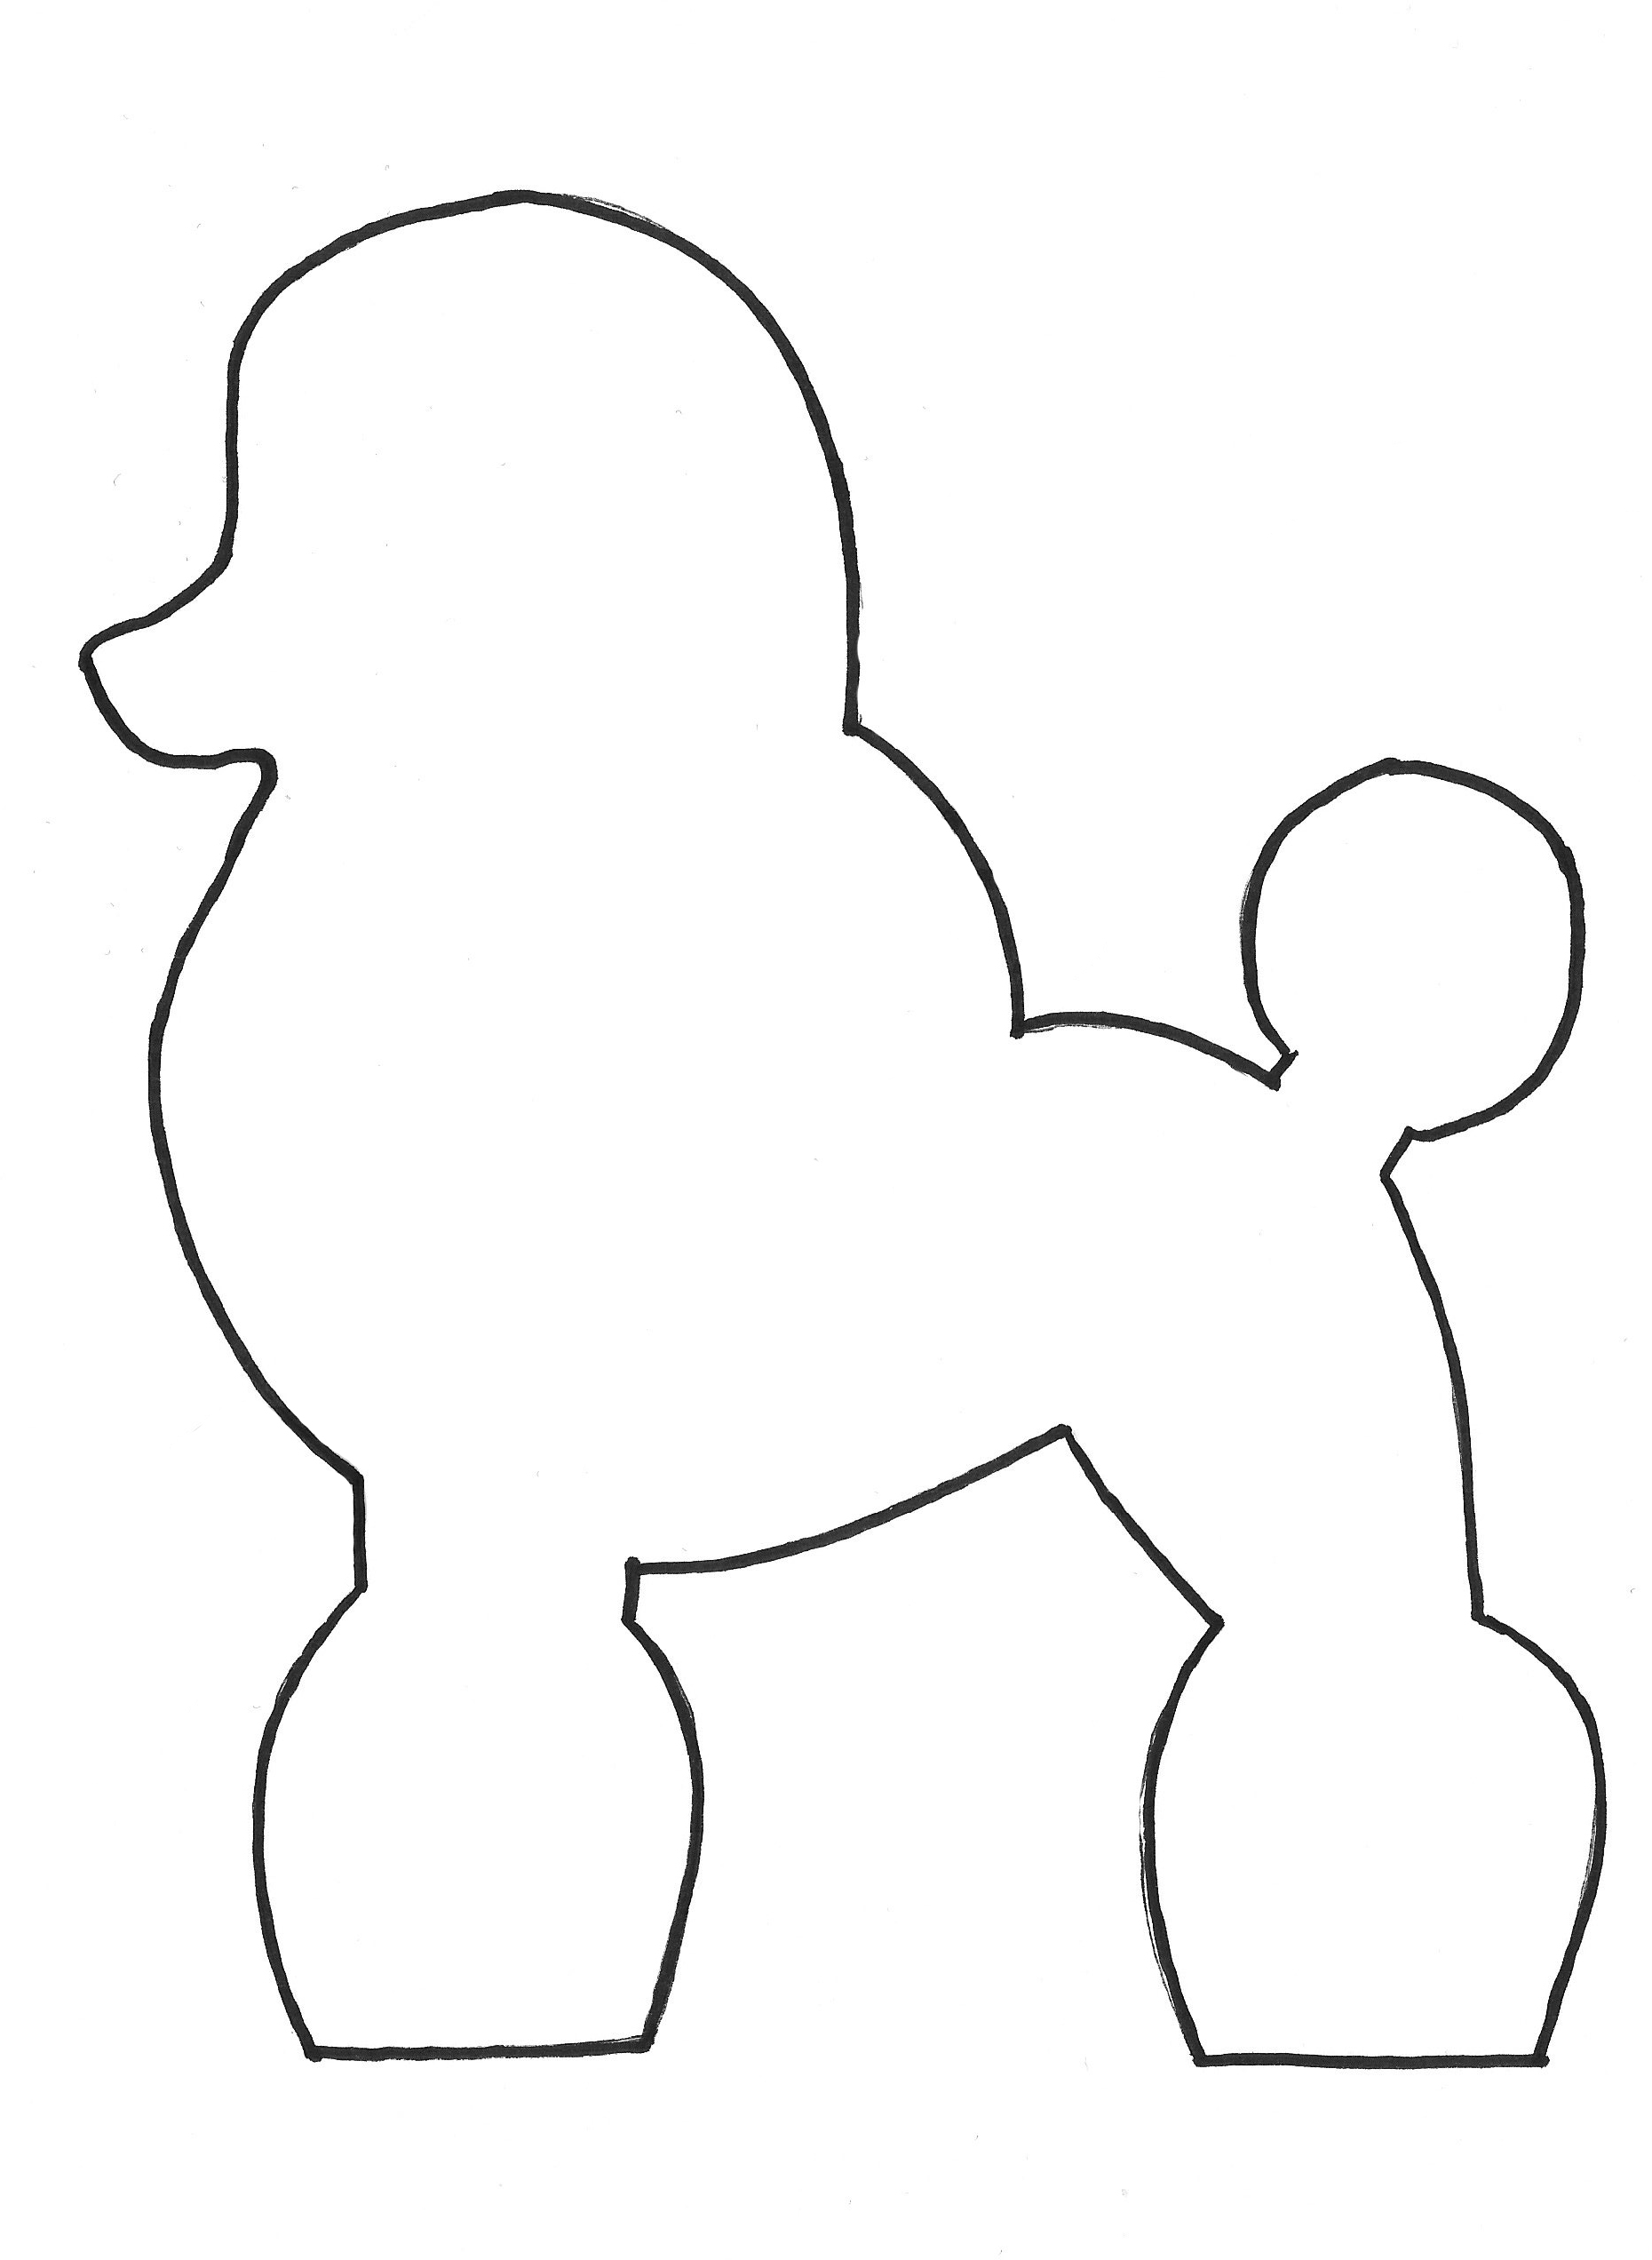 Poodle Skirt Drawing Free download on ClipArtMag